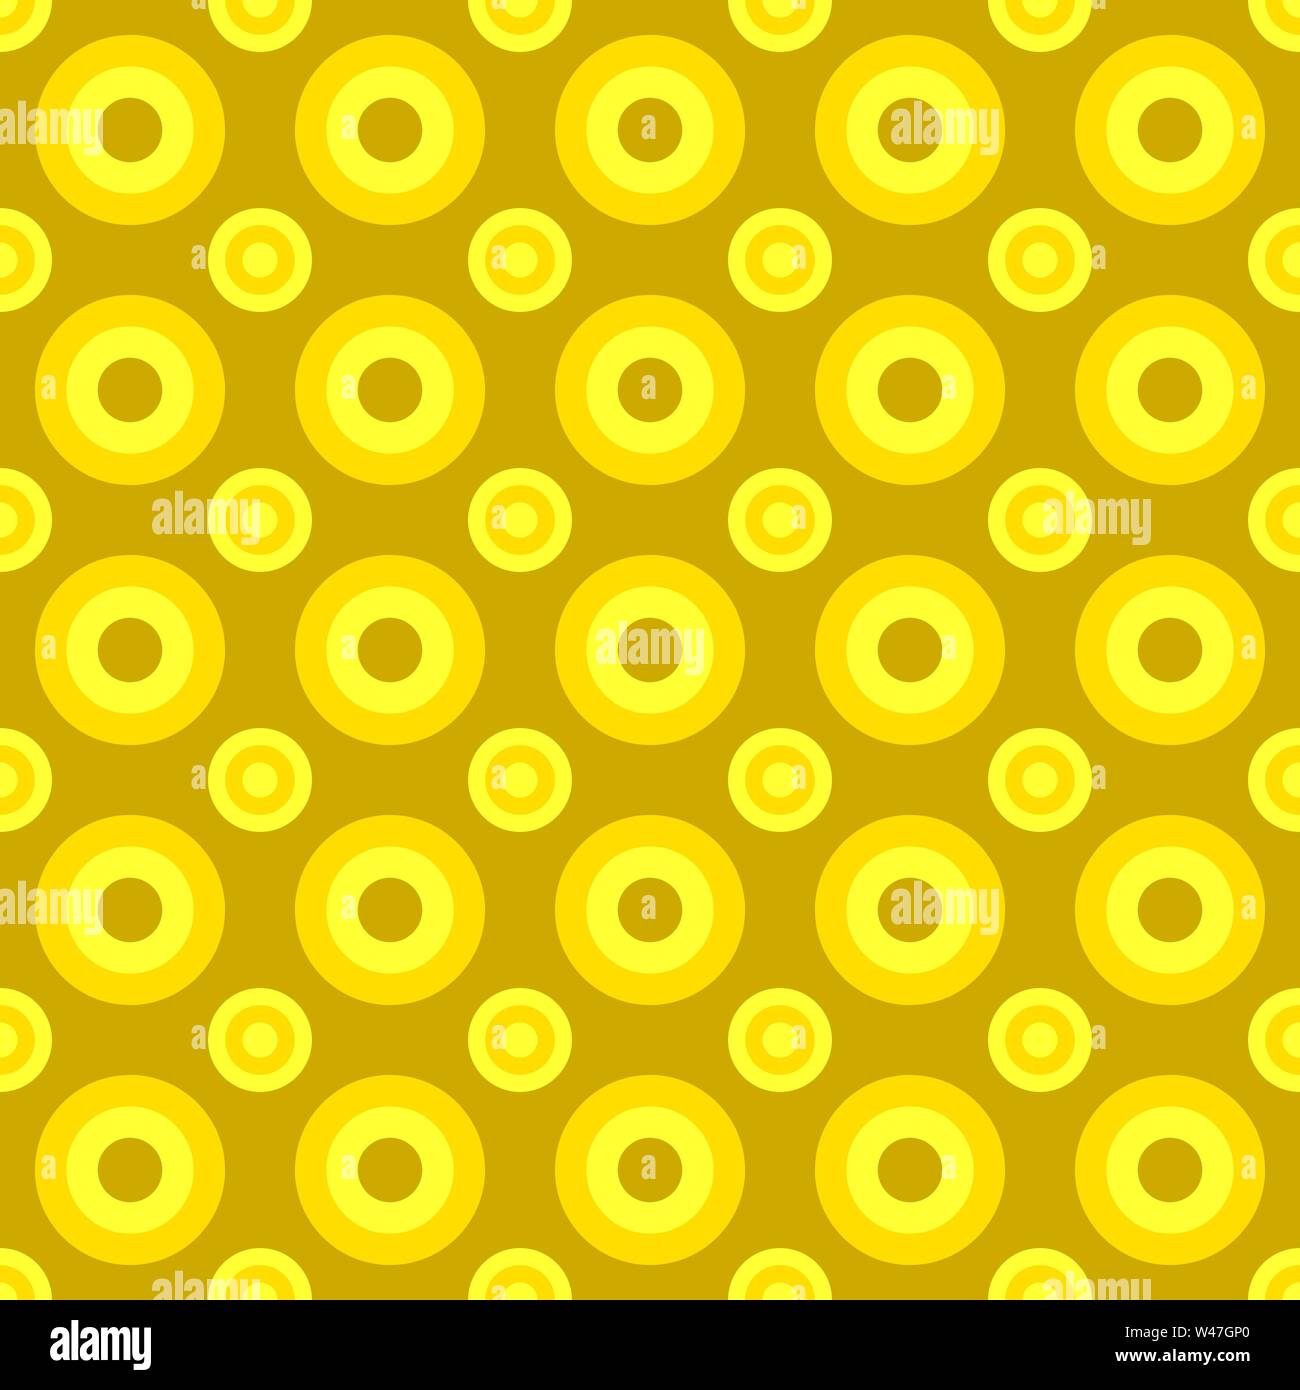 Simple Seamless Circle Pattern Background Vector Illustration Stock